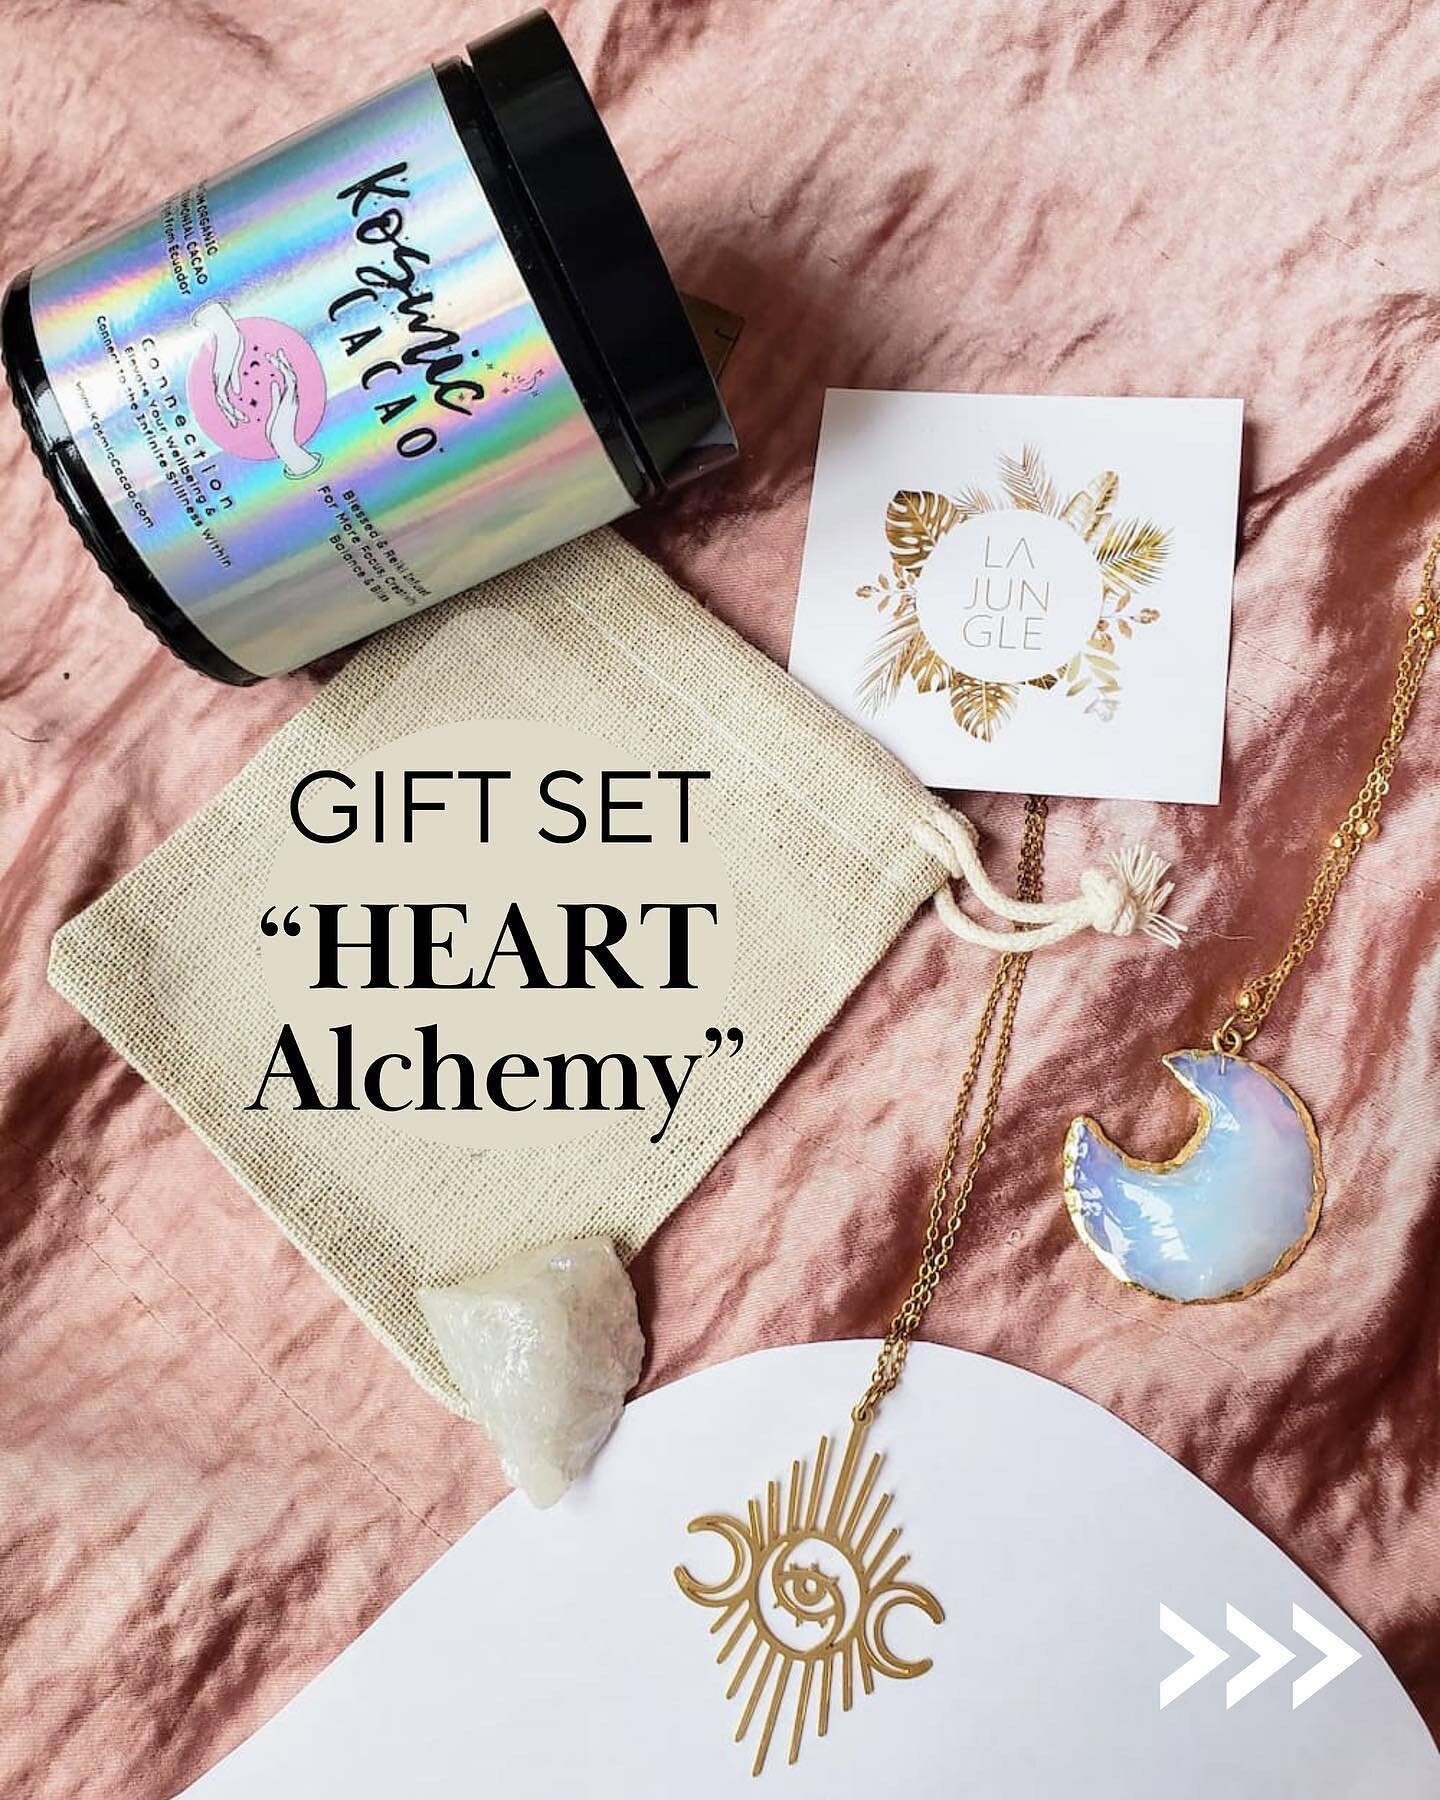 🥂 Today I am so so excited to officially announce the launch of our collaboration between @la.jungle X @kosmiccacao 

✨Embrace the magic within this upcoming festive season with our &lsquo;Heart Alchemy&rsquo; gift box. 

💜It&rsquo;s a self-love jo